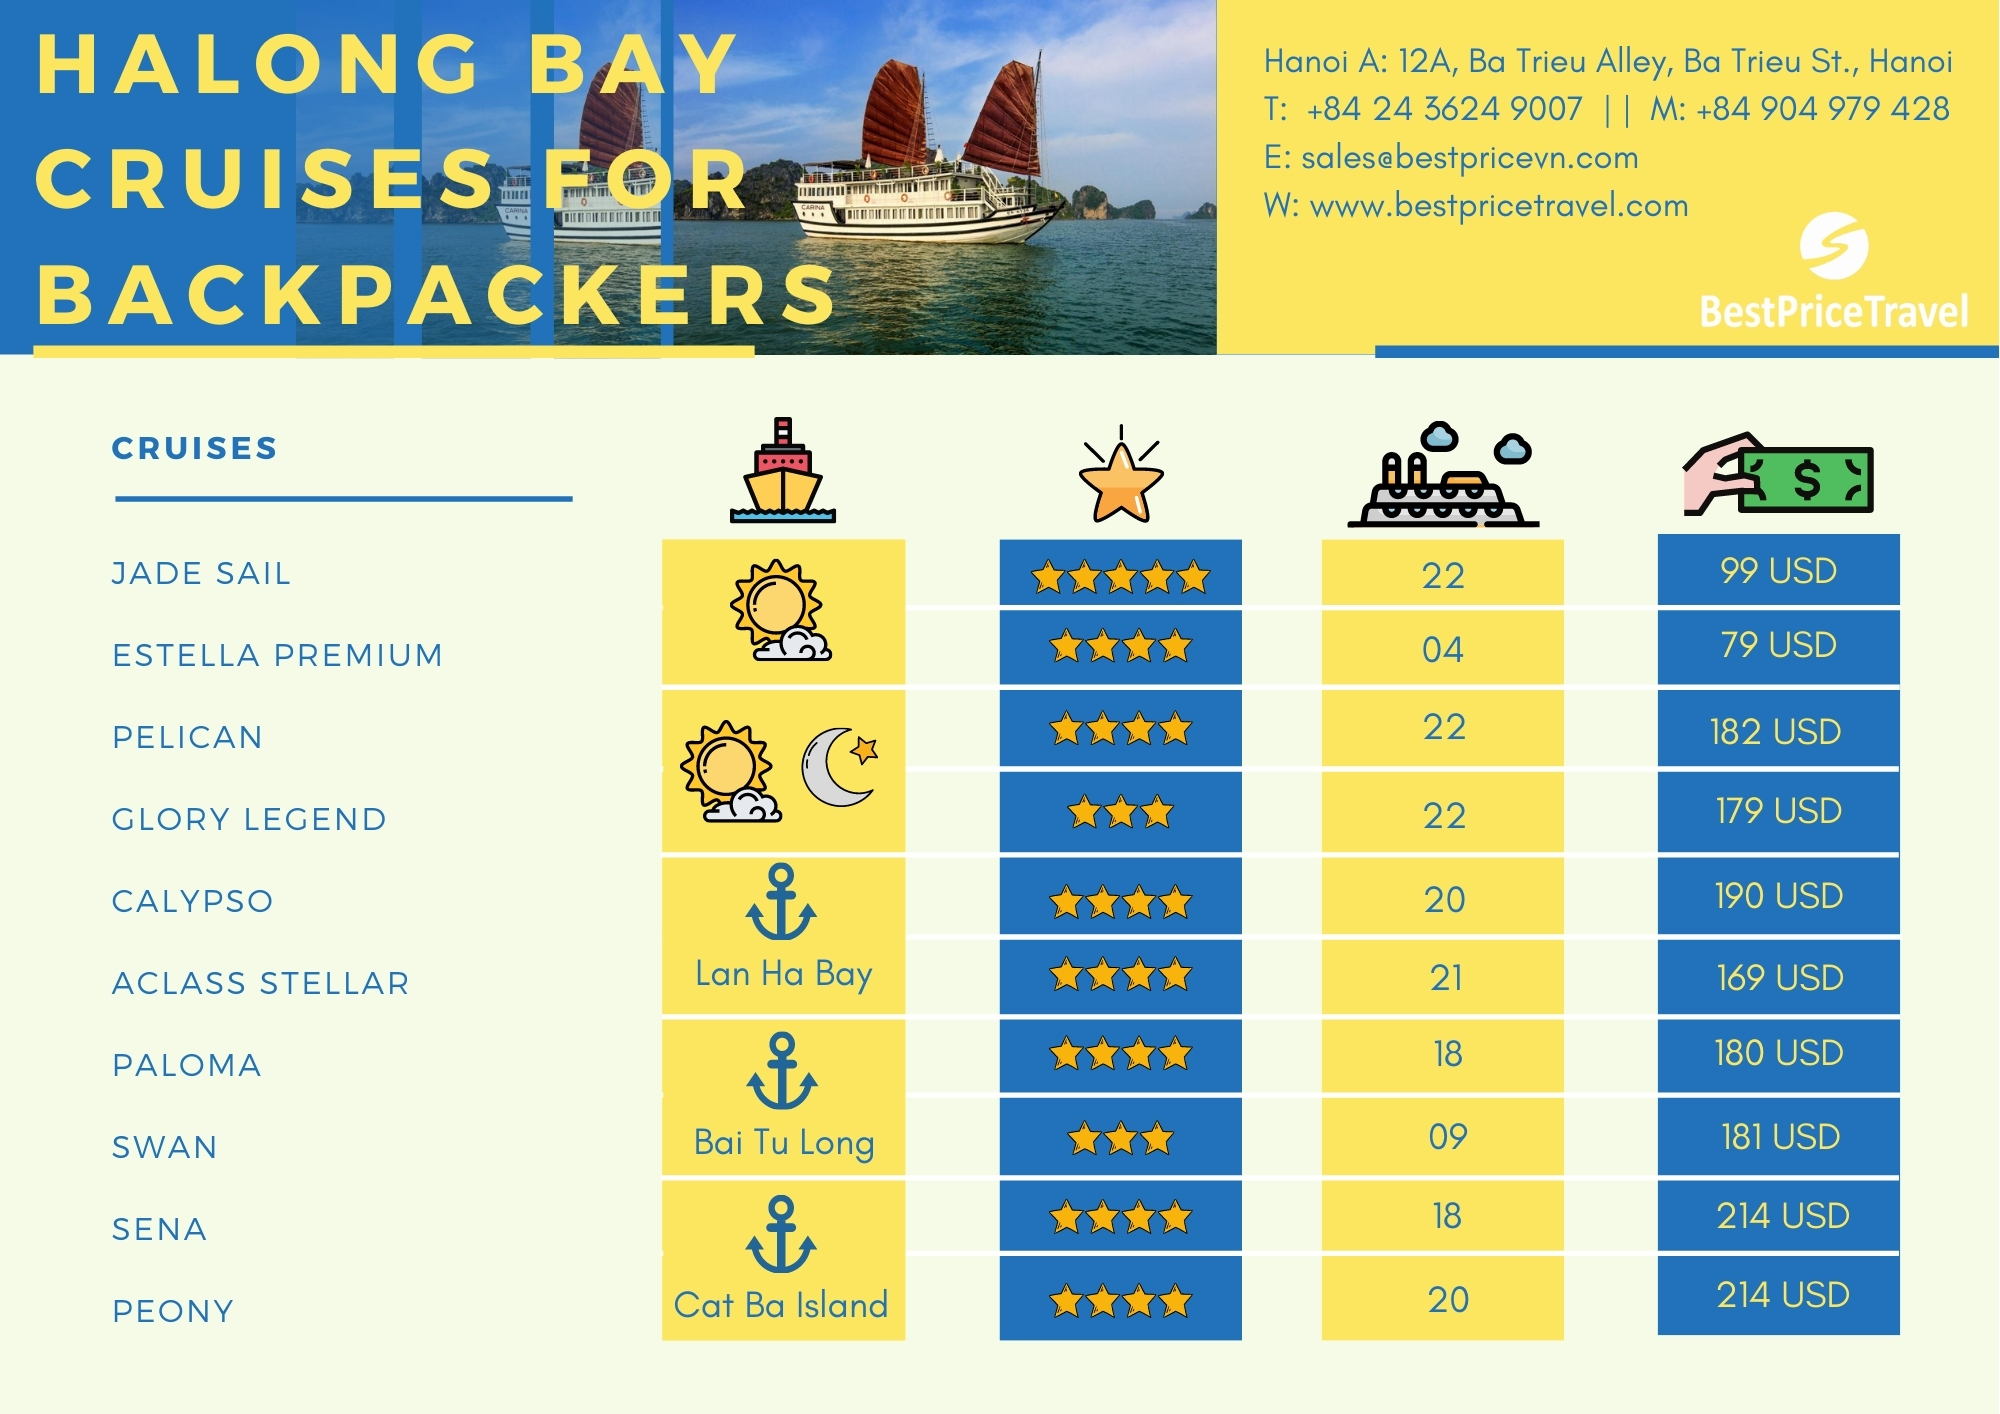 10 best halong Bay tours for backpackers